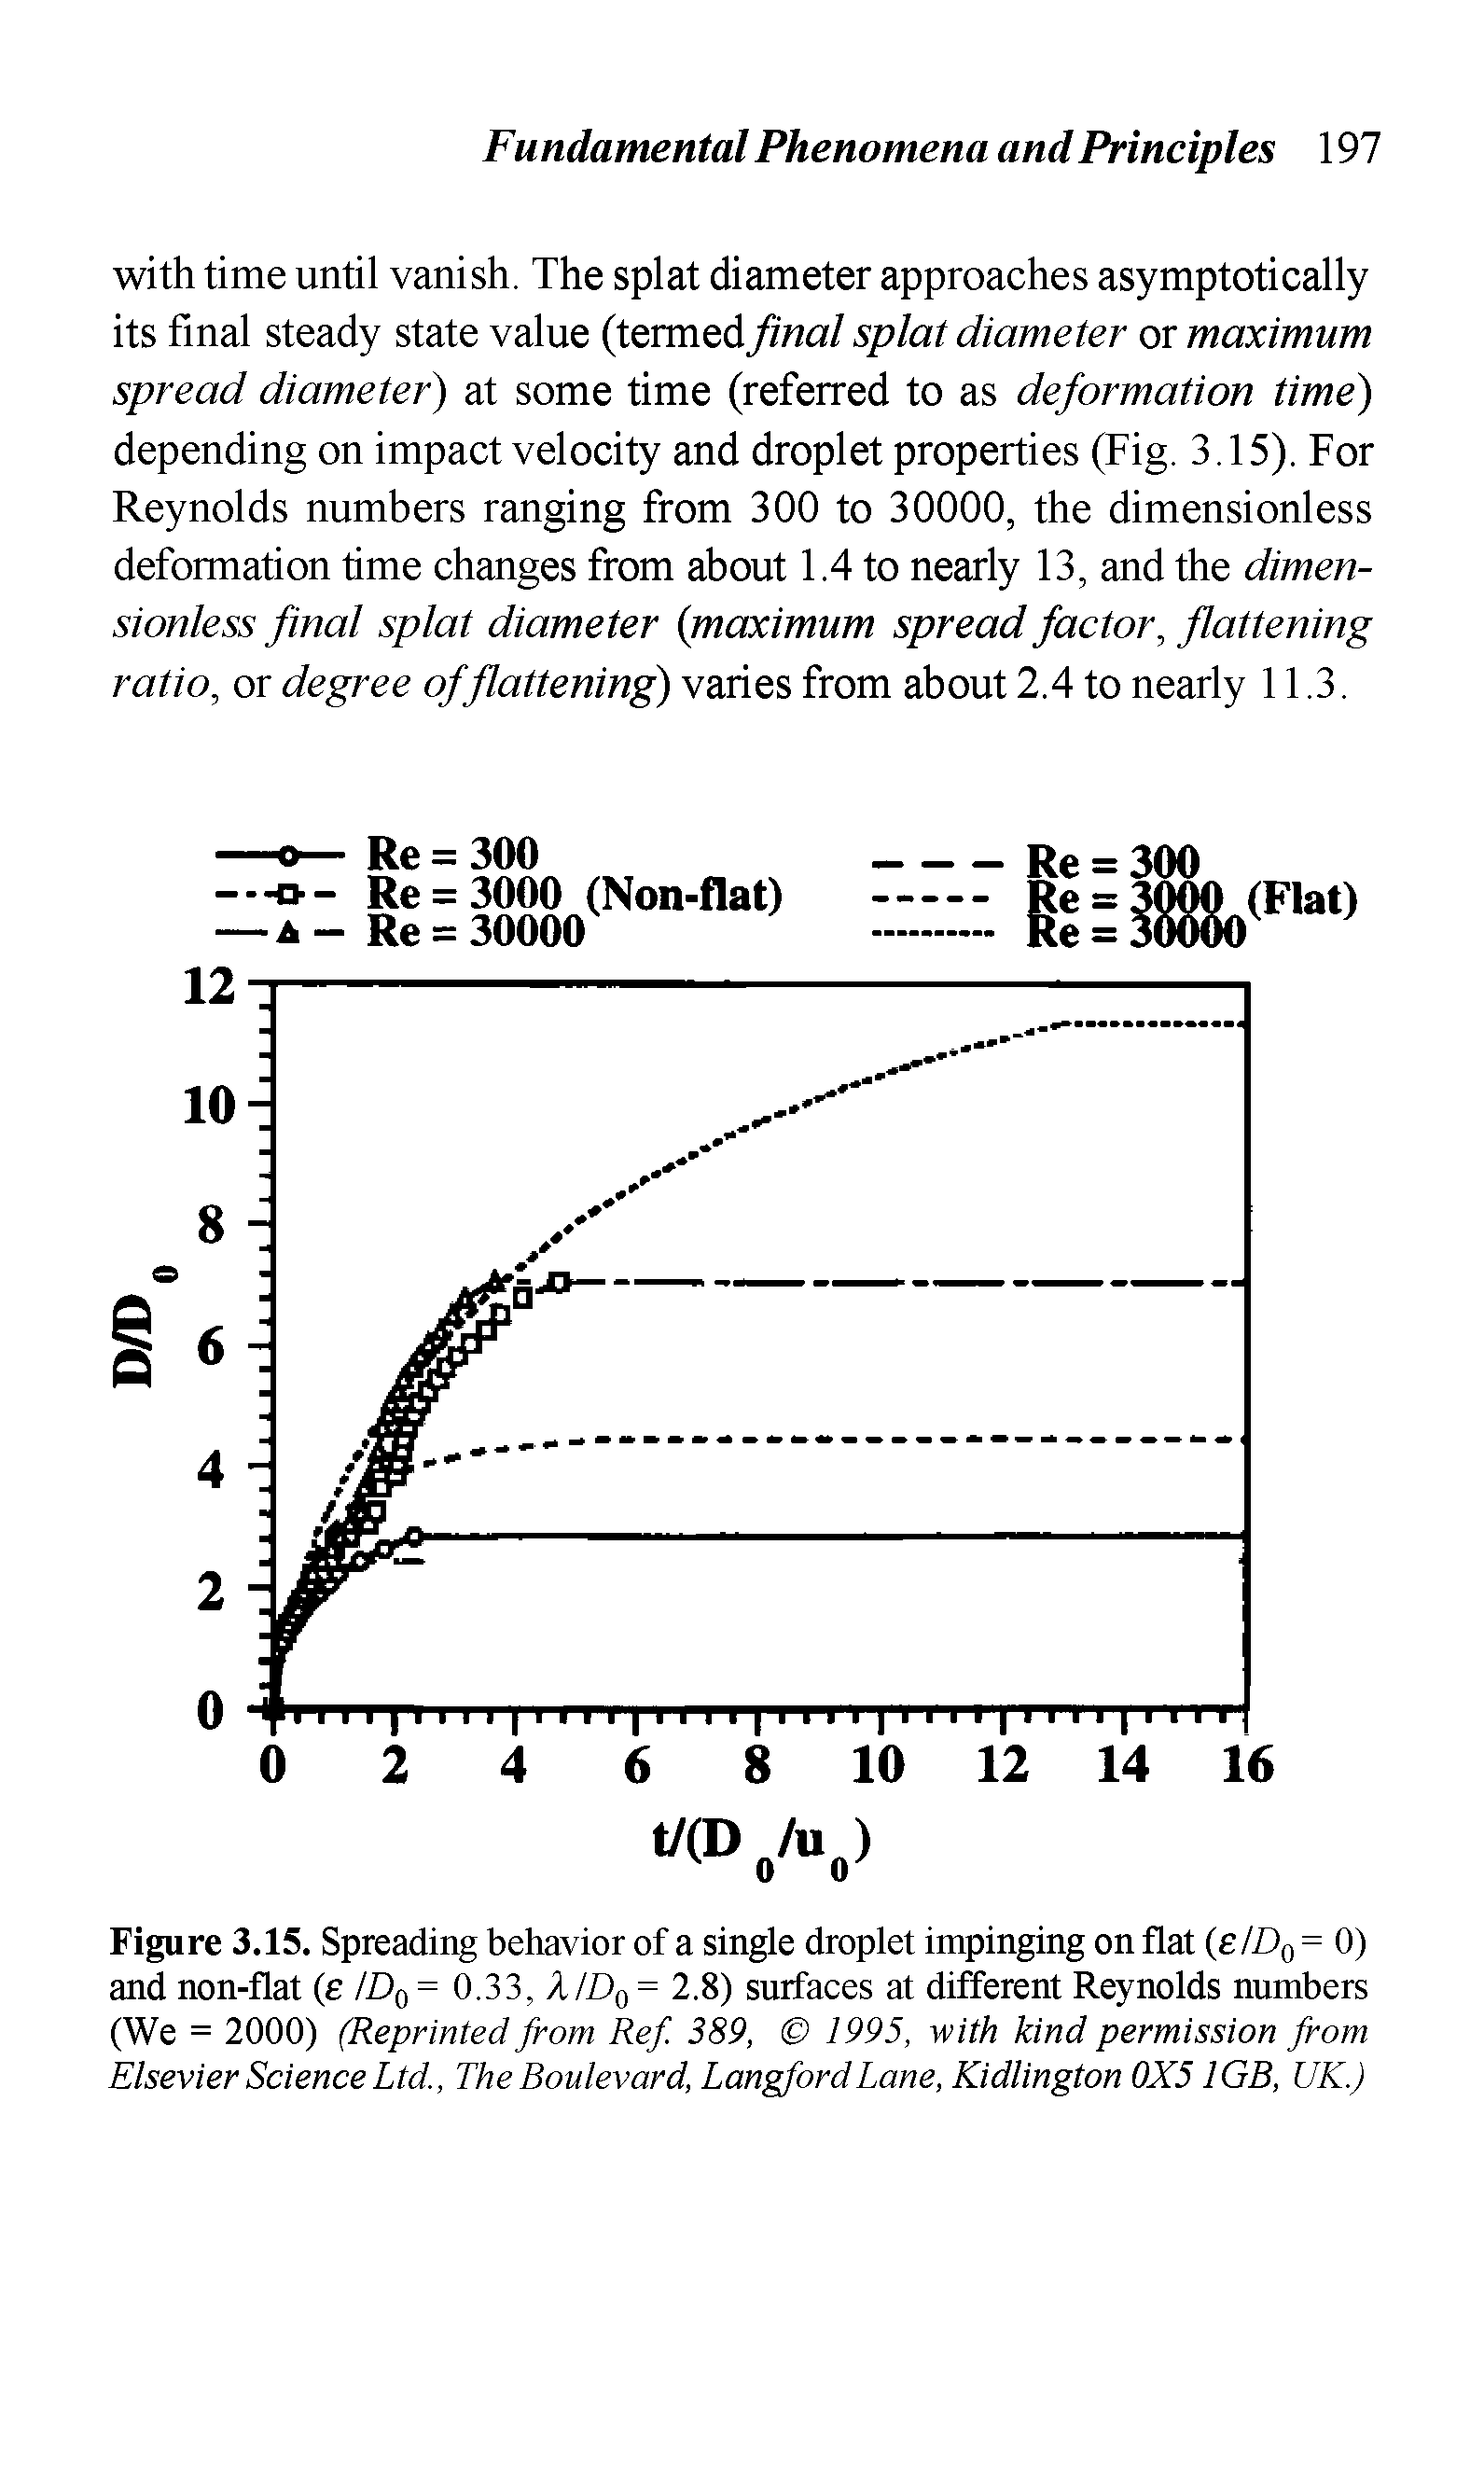 Figure 3.15. Spreading behavior of a single droplet impinging on flat (e/D0 = 0) and non-flat (e ID0 = 0.33, XID0 =2.8) surfaces at different Reynolds numbers (We = 2000) (Reprinted from Ref. 389, 1995, with kind permission from Elsevier Science Ltd., The Boulevard, Langford Lane, Kidlington 0X51GB, UK.)...